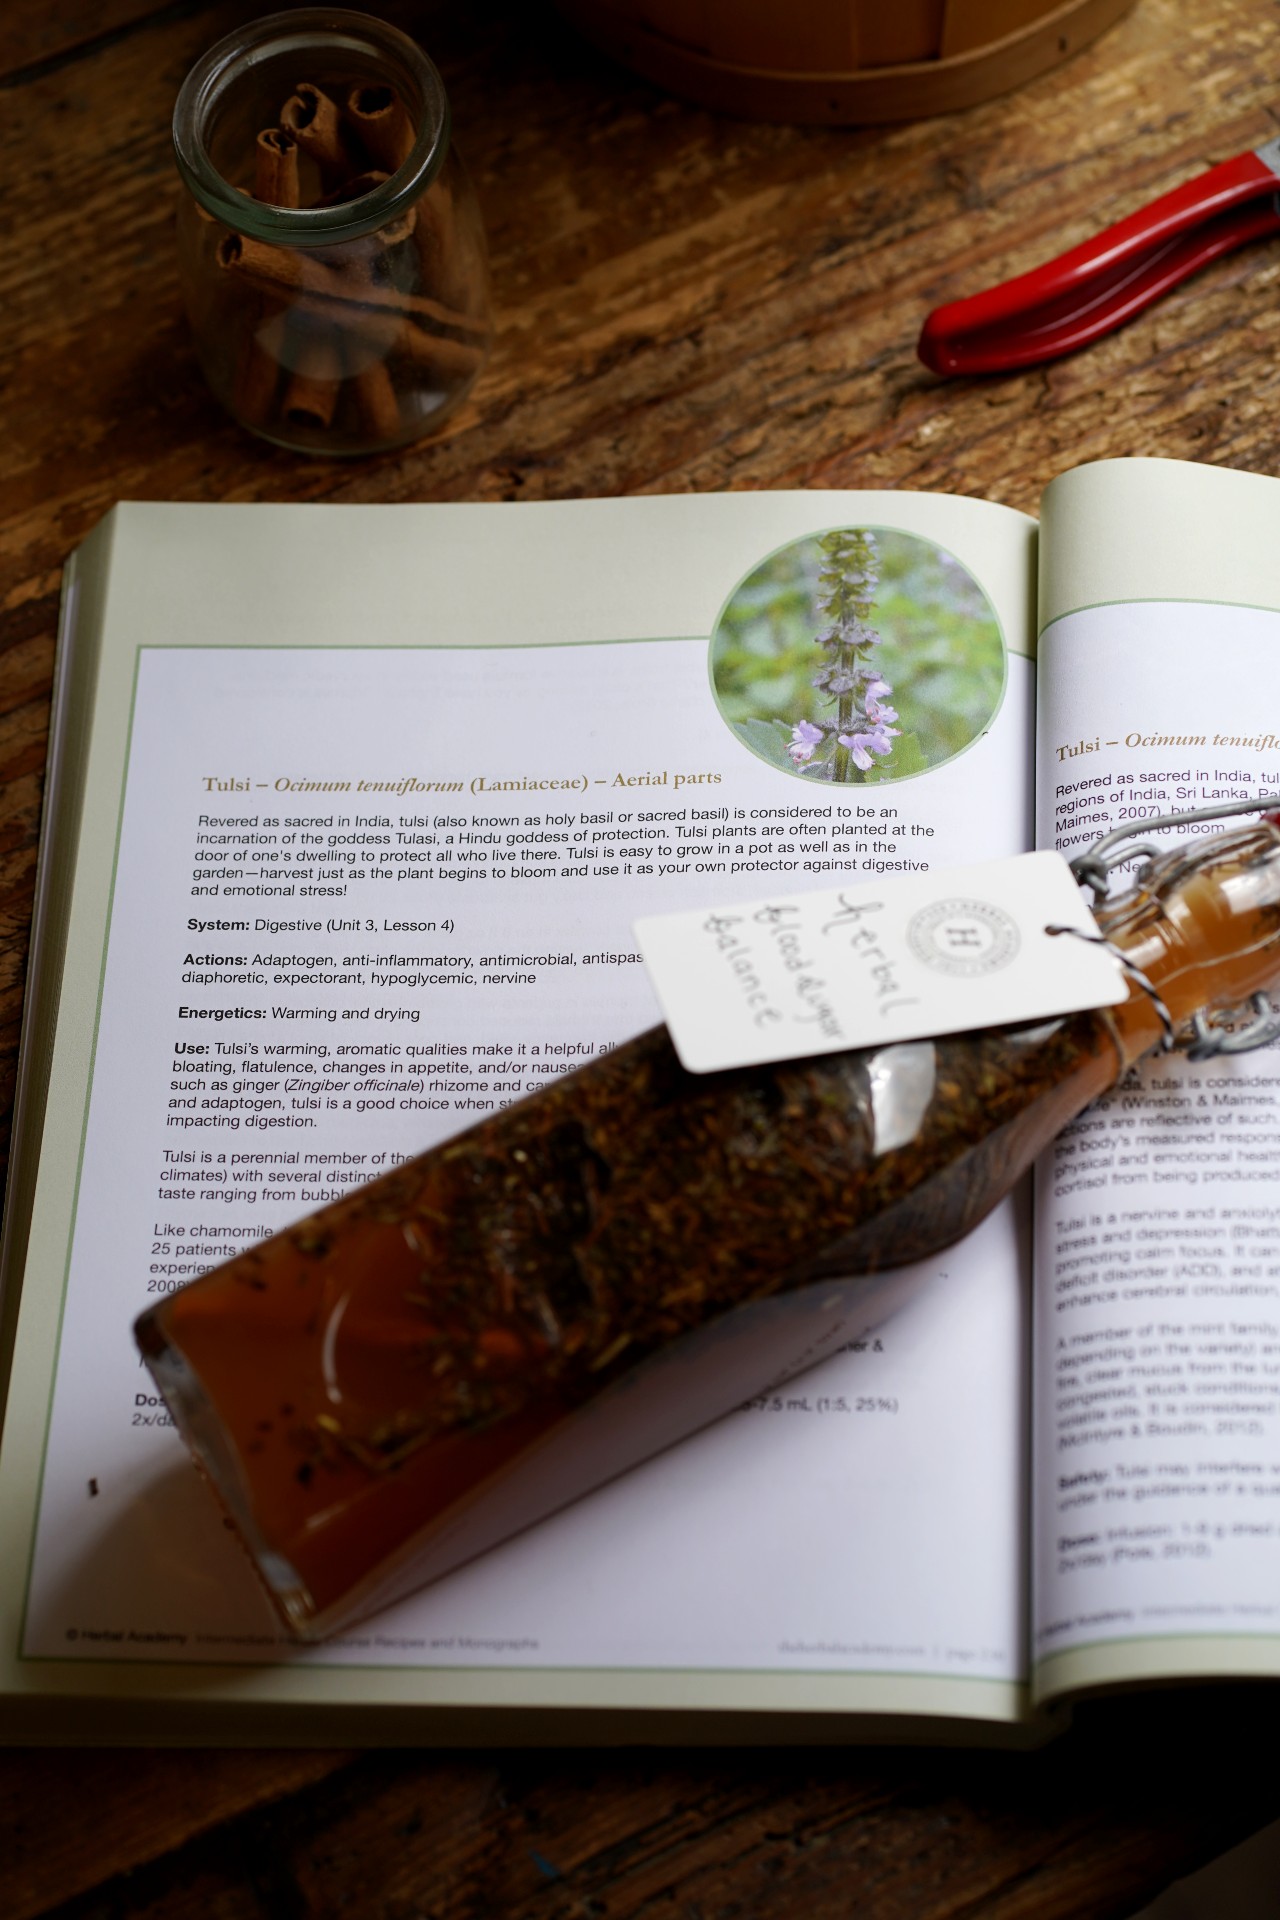 bottle of herbal blood sugar balance laying on an open book that is turned to a page on tulsi